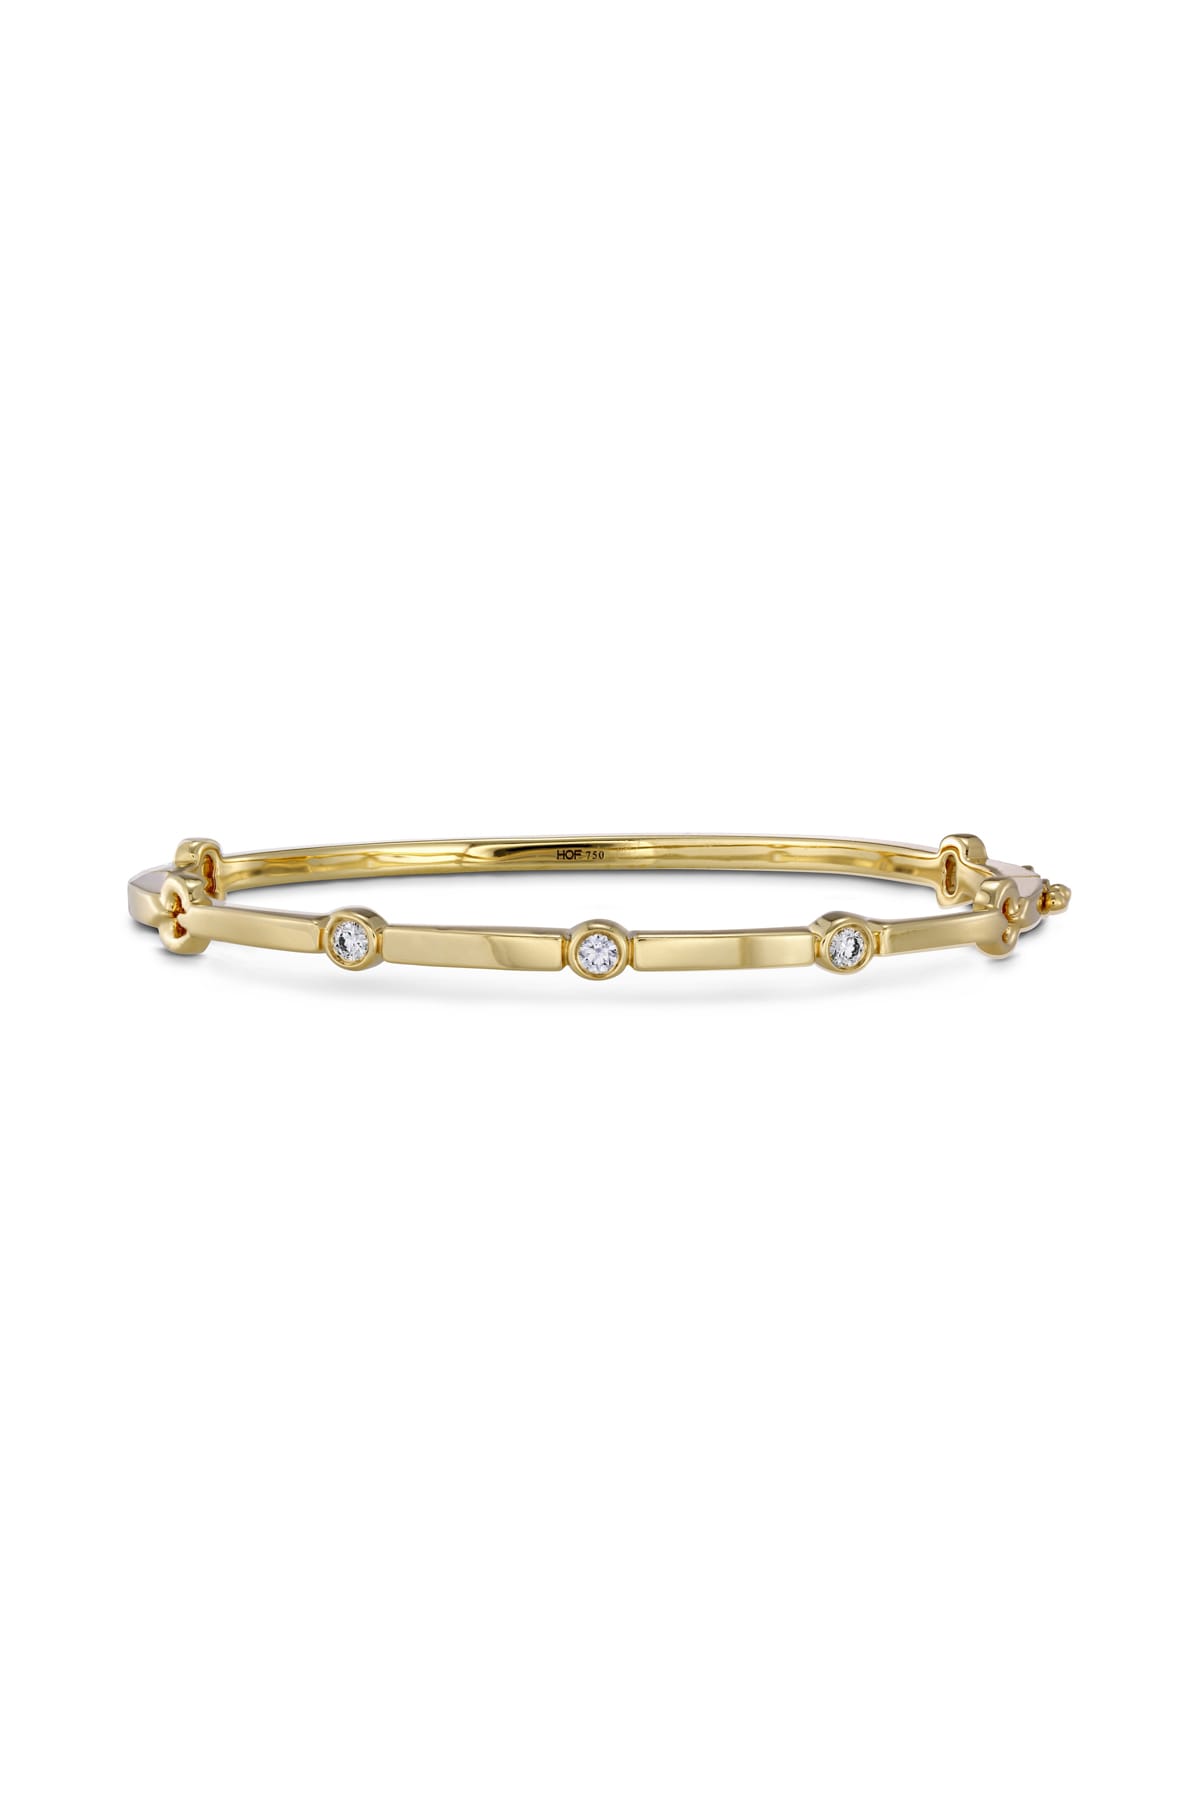 Copley Multi Stone Bangle From Hearts On Fire available at LeGassick Diamonds and Jewellery Gold Coast, Australia.